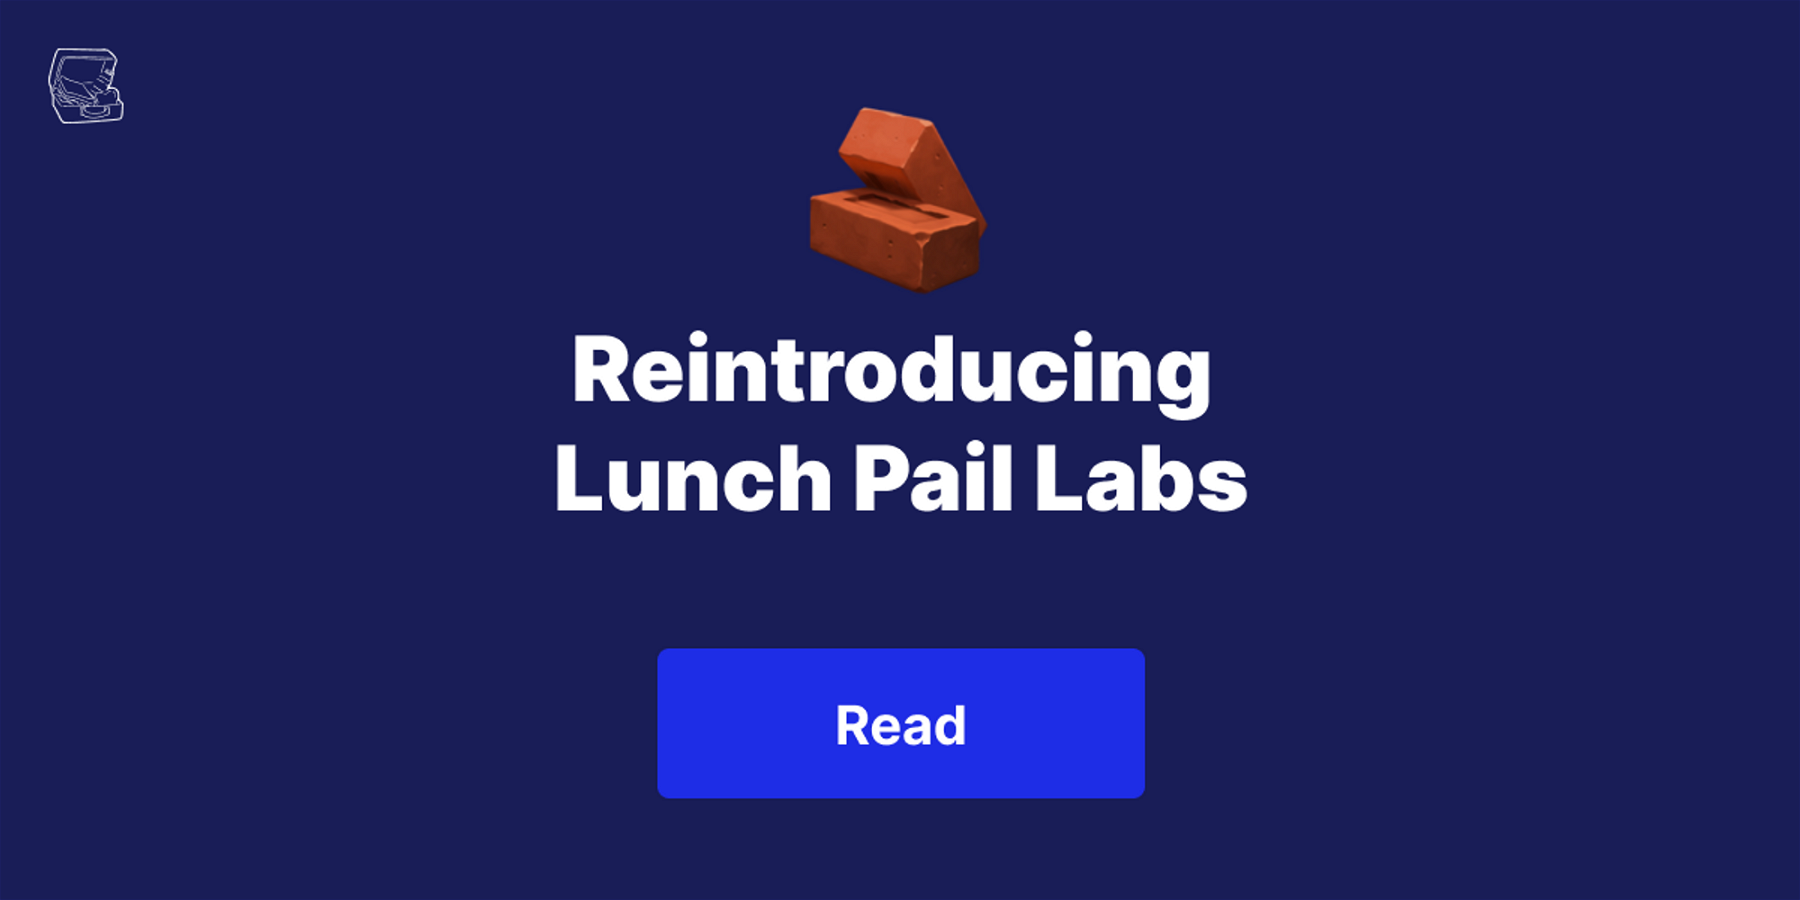 From no-code studio to building blocks: 3 years of Lunch Pail Labs